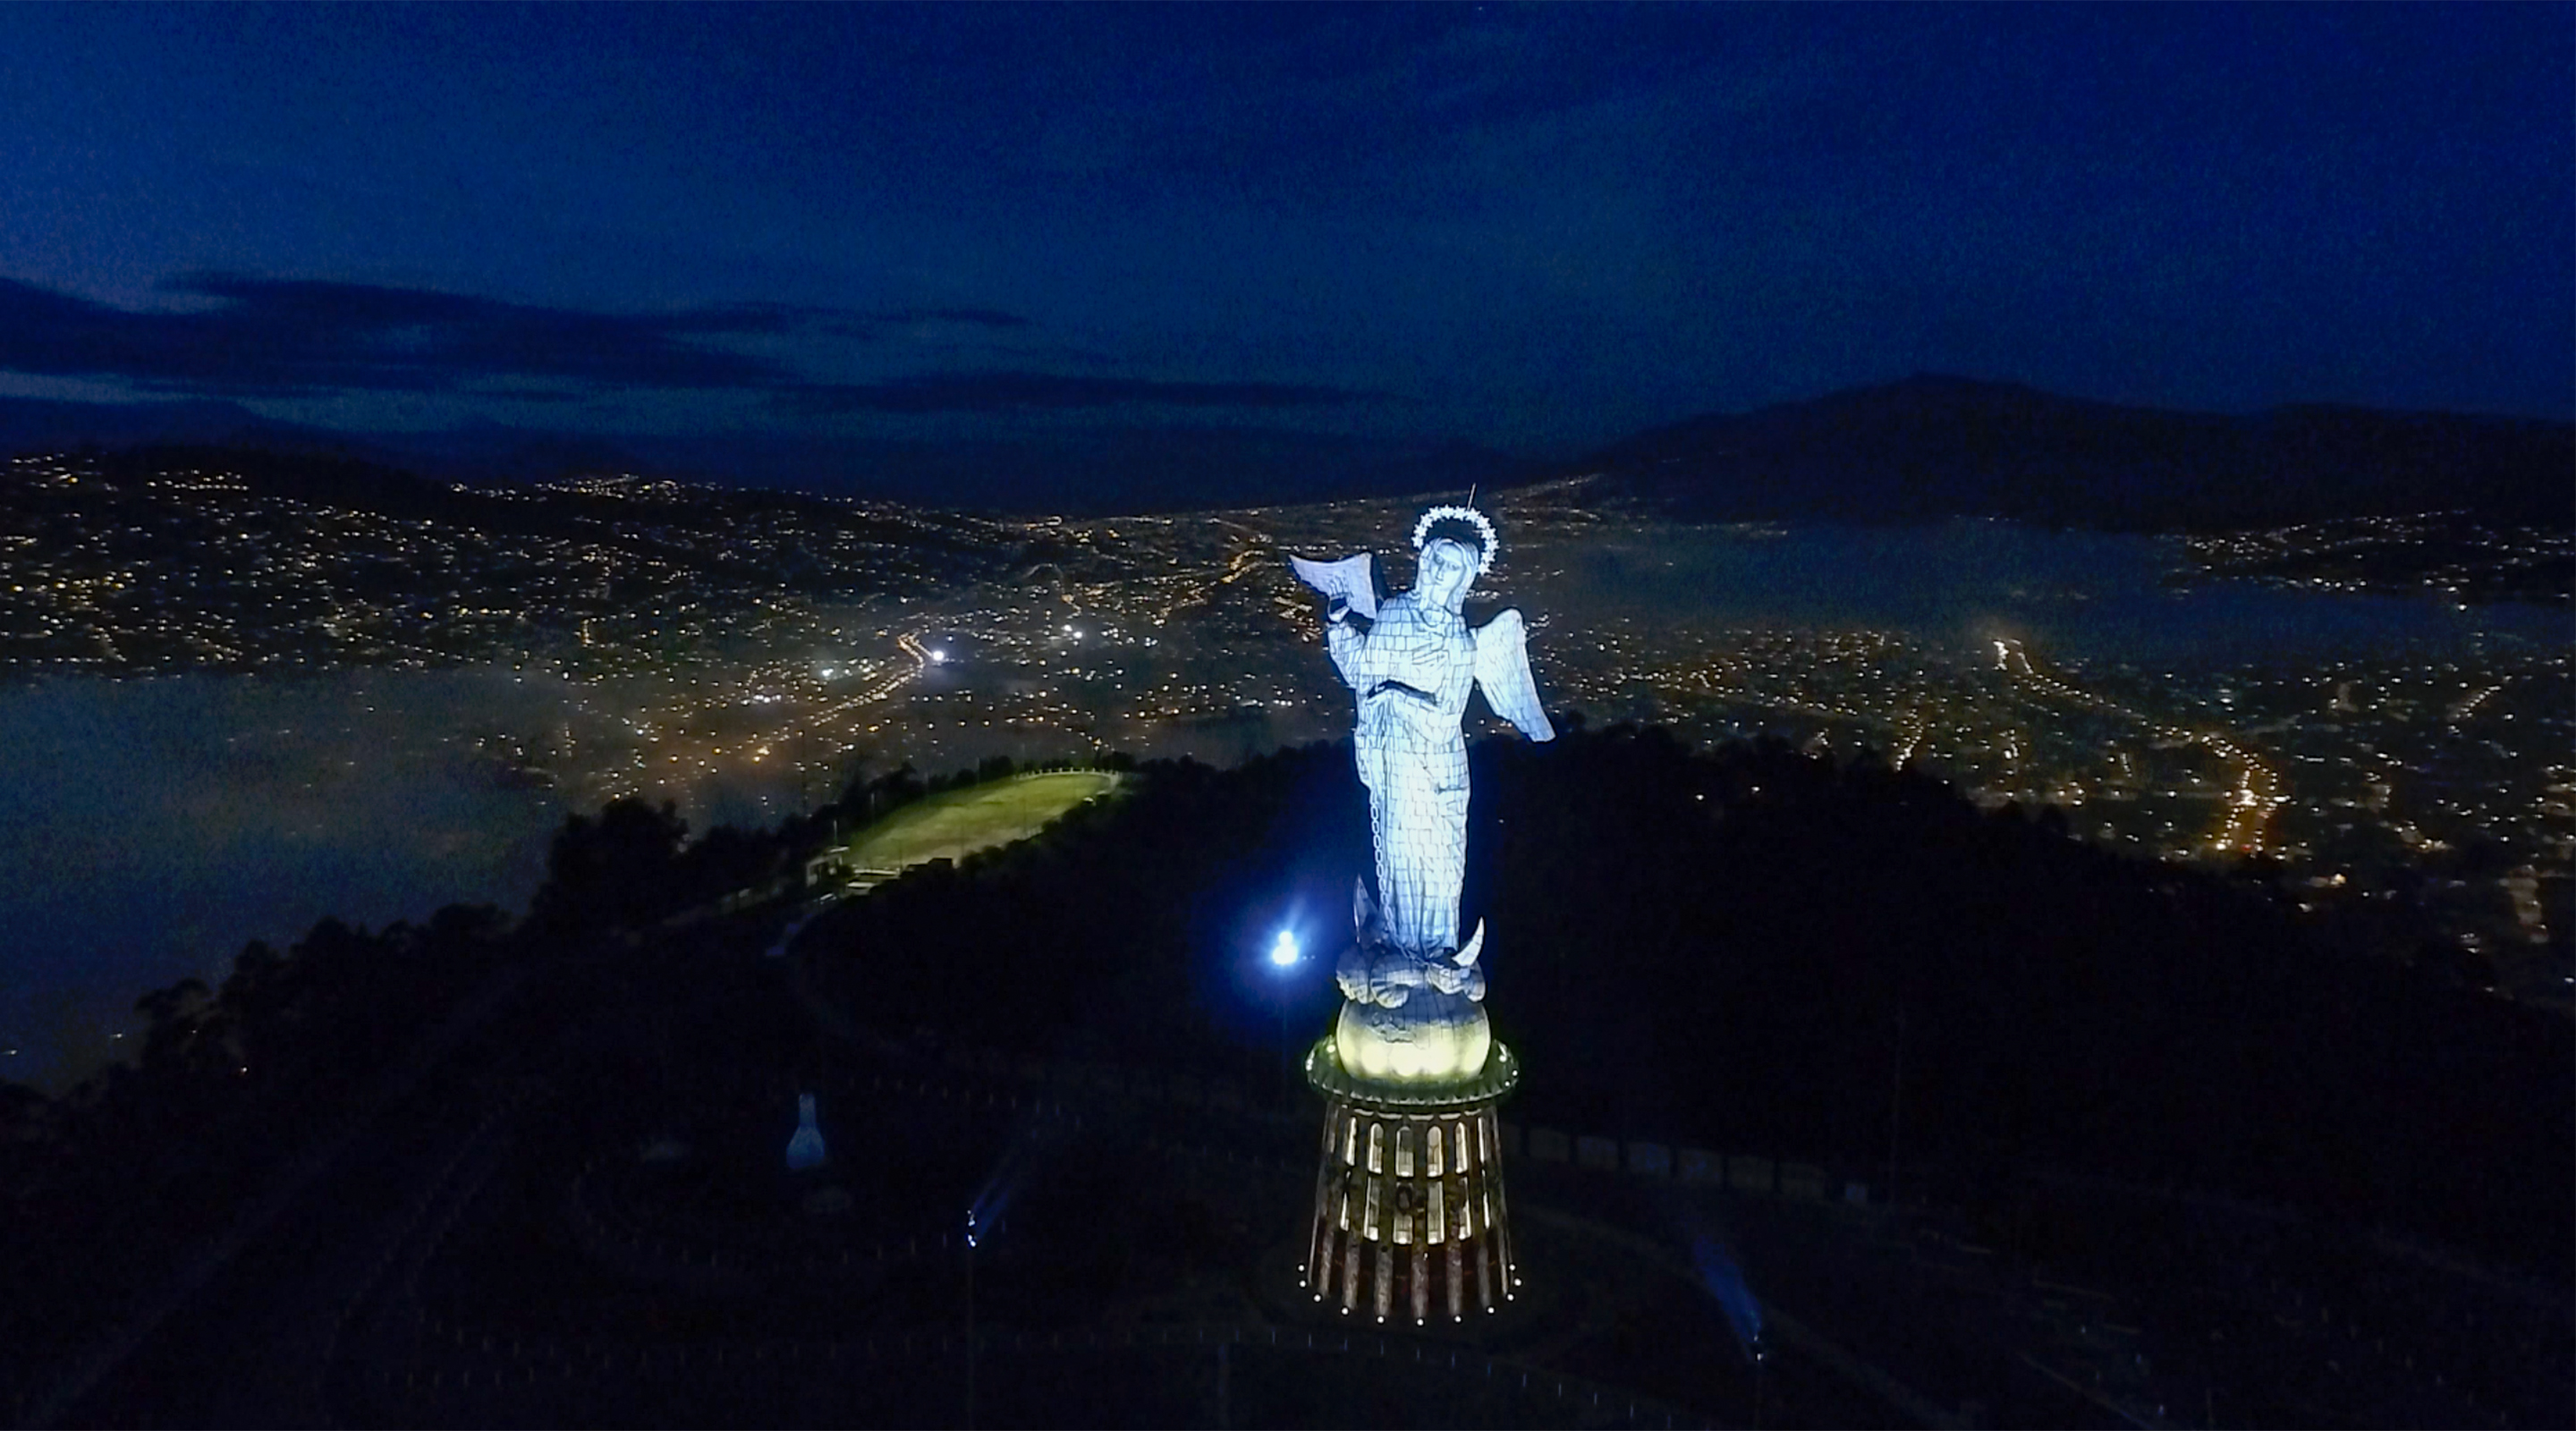 The Panecillo stands watch over the historic center of Quito.